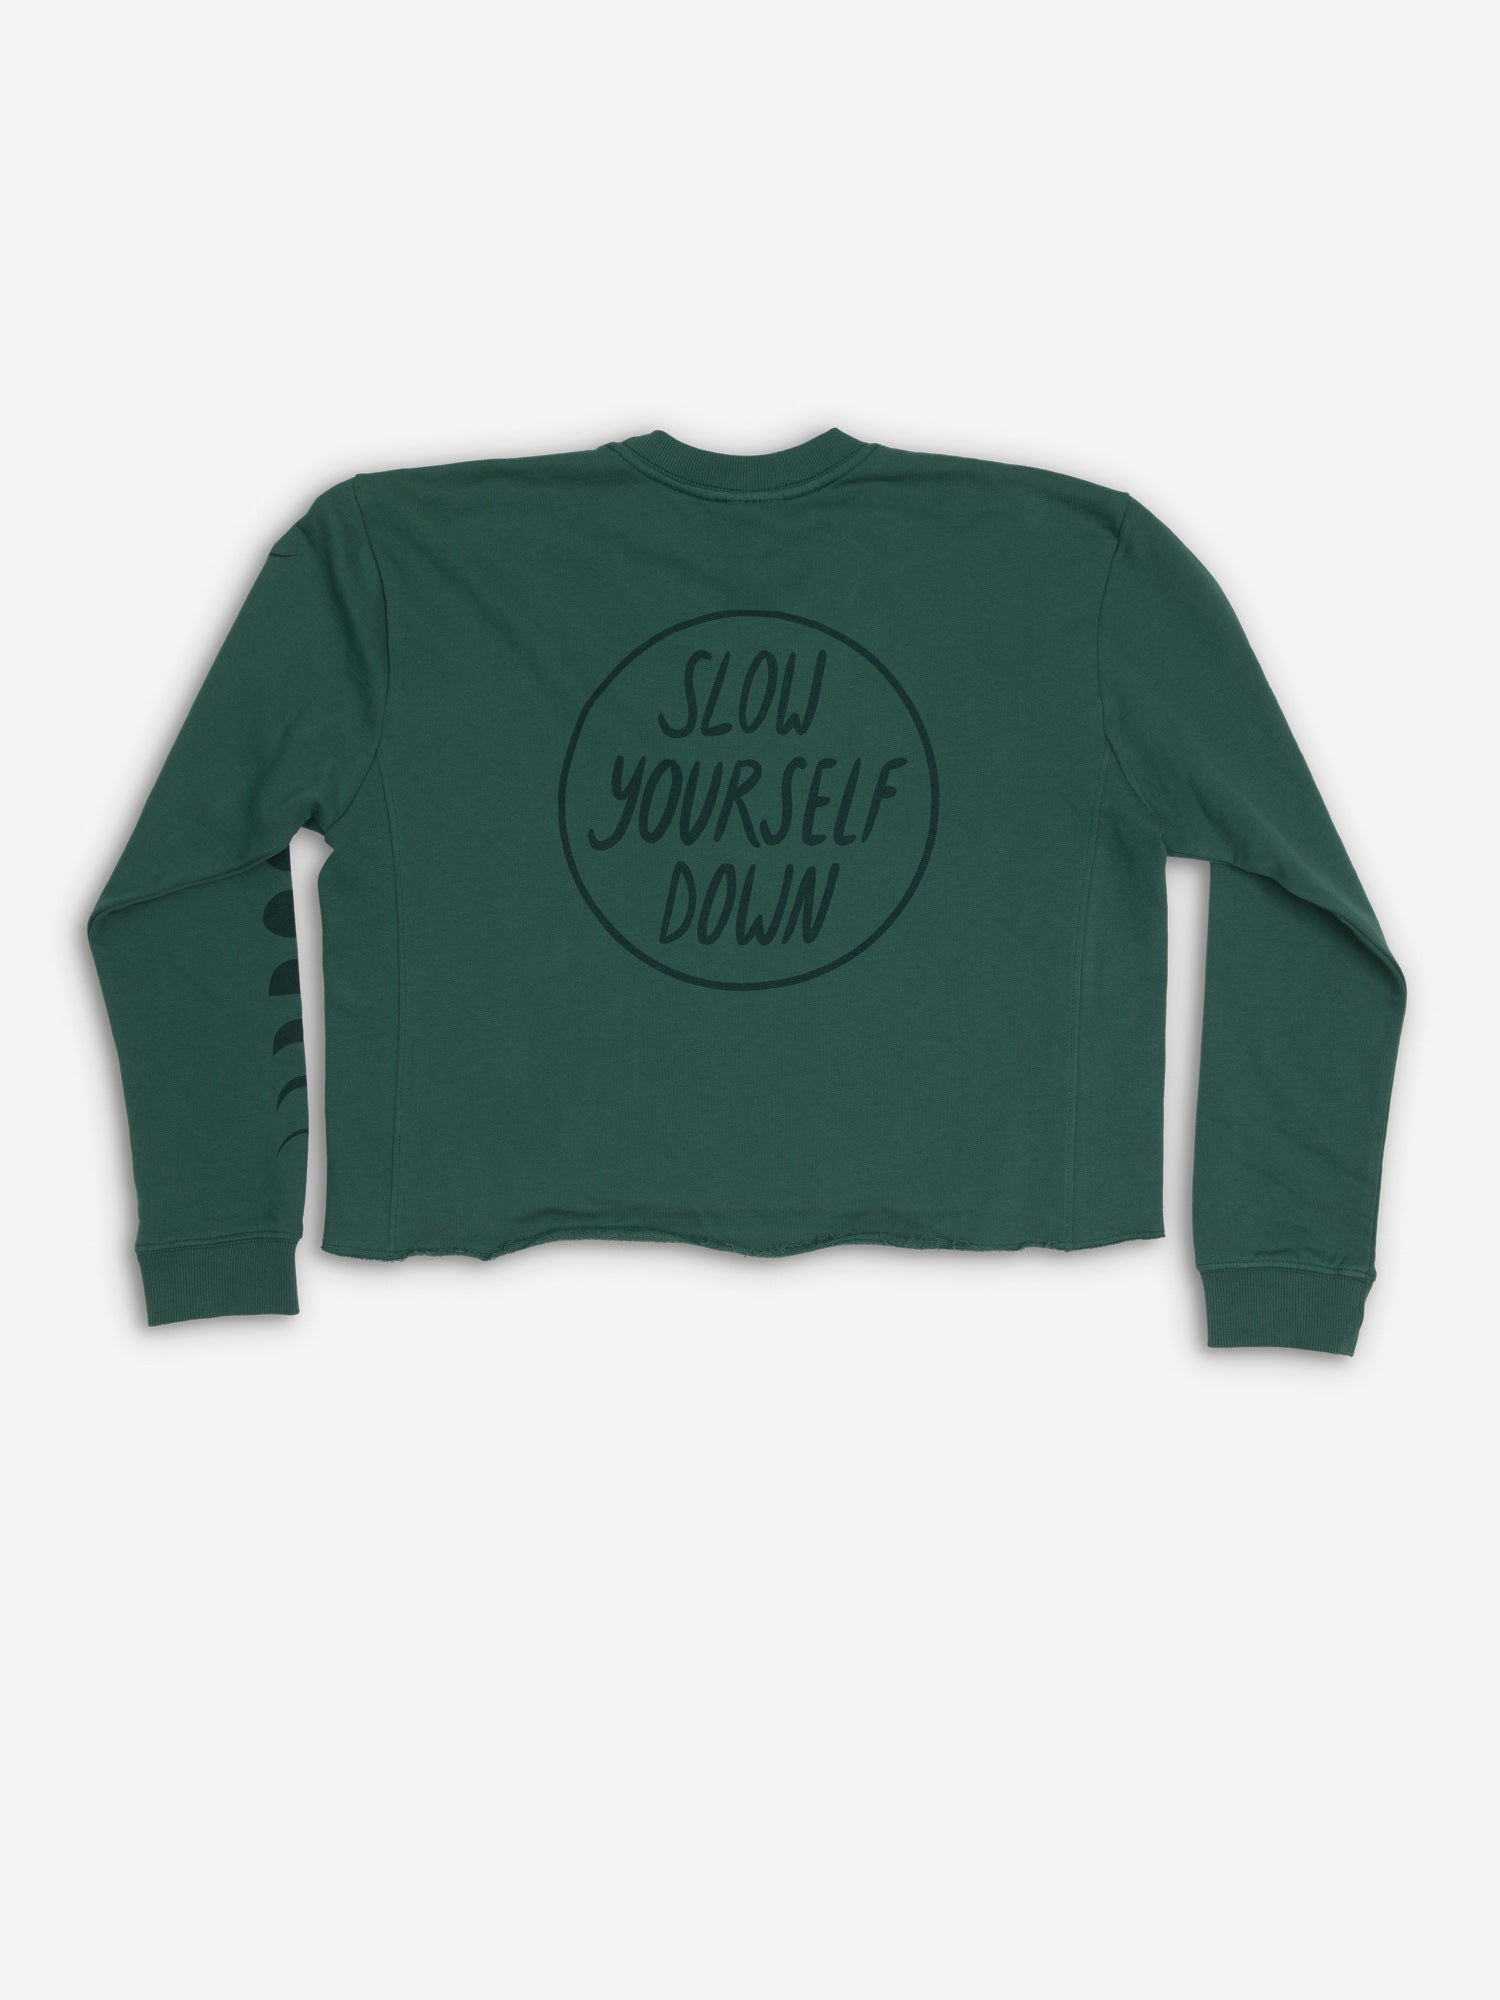 Moon Phase Crop Sweater Crewneck - Slow Yourself Down